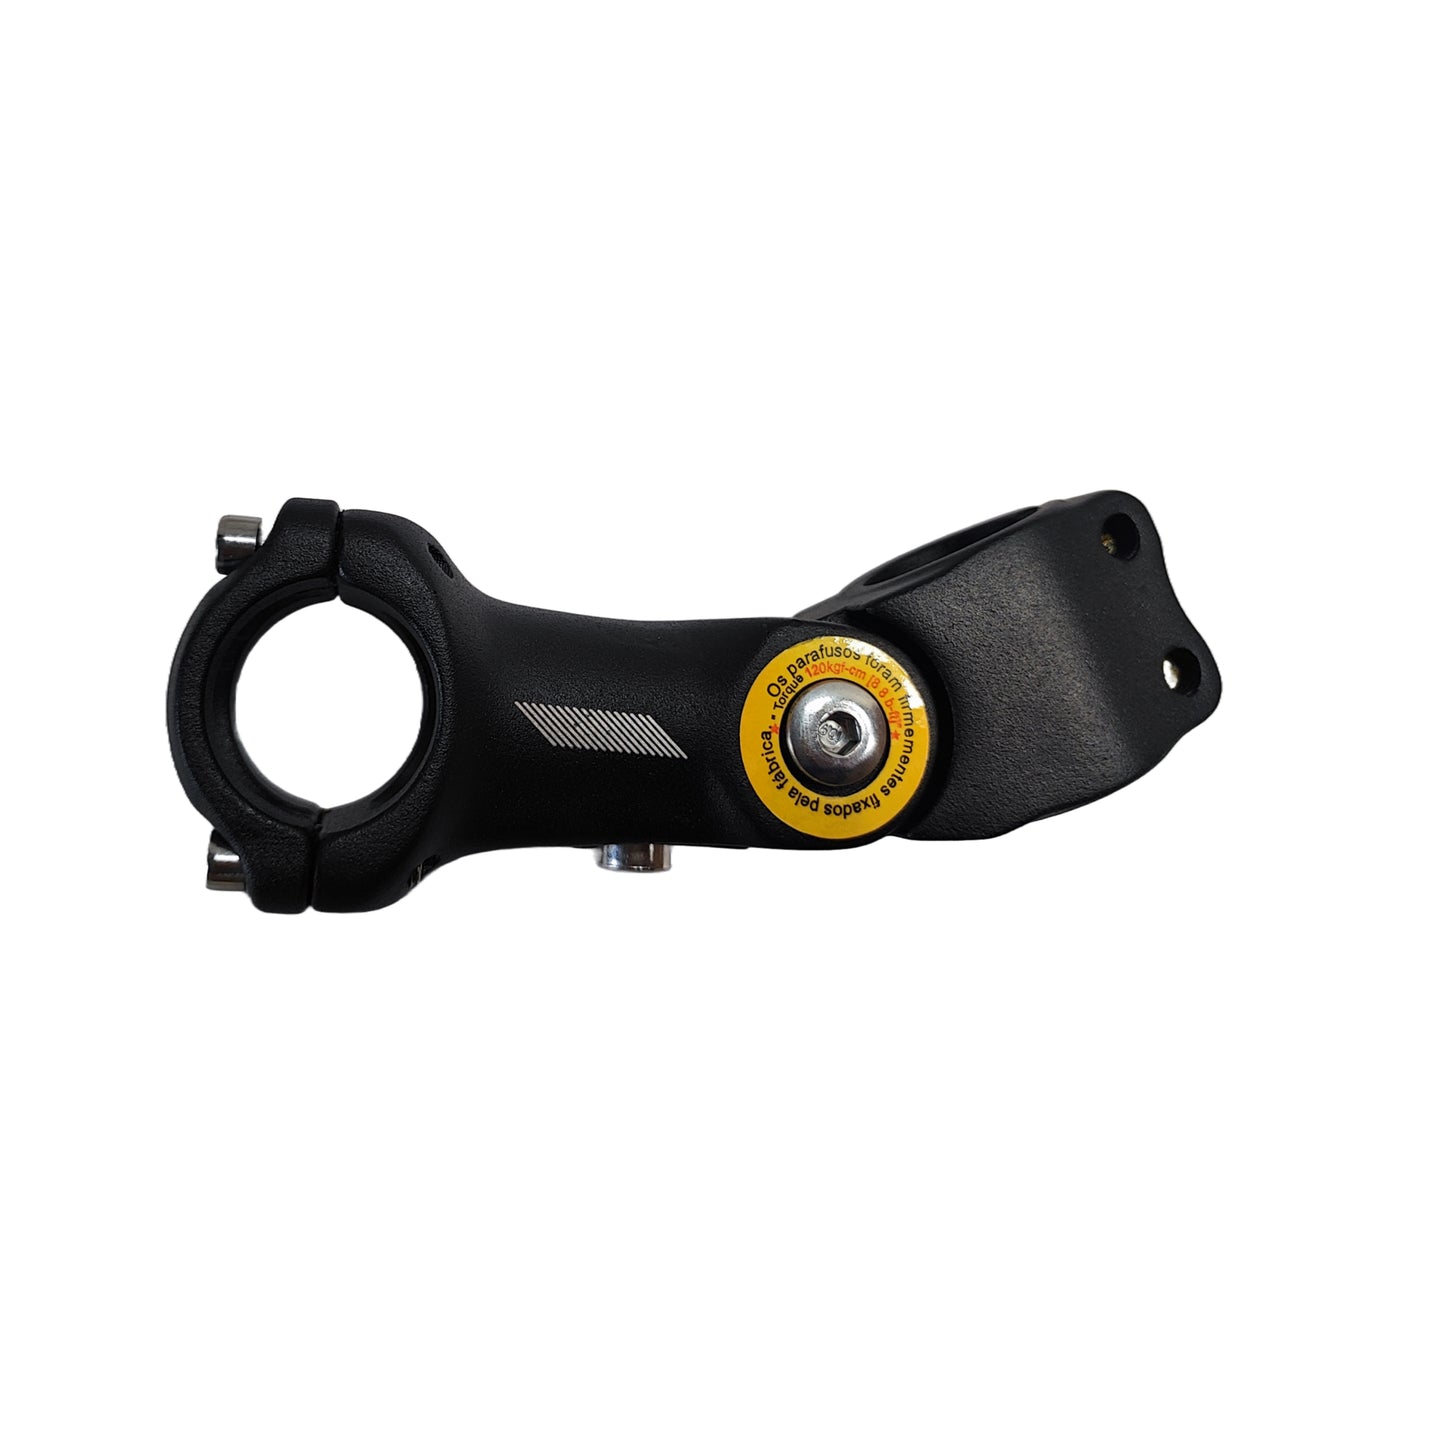 Adjustable Bicycle Stem Accessories side view by omobikes